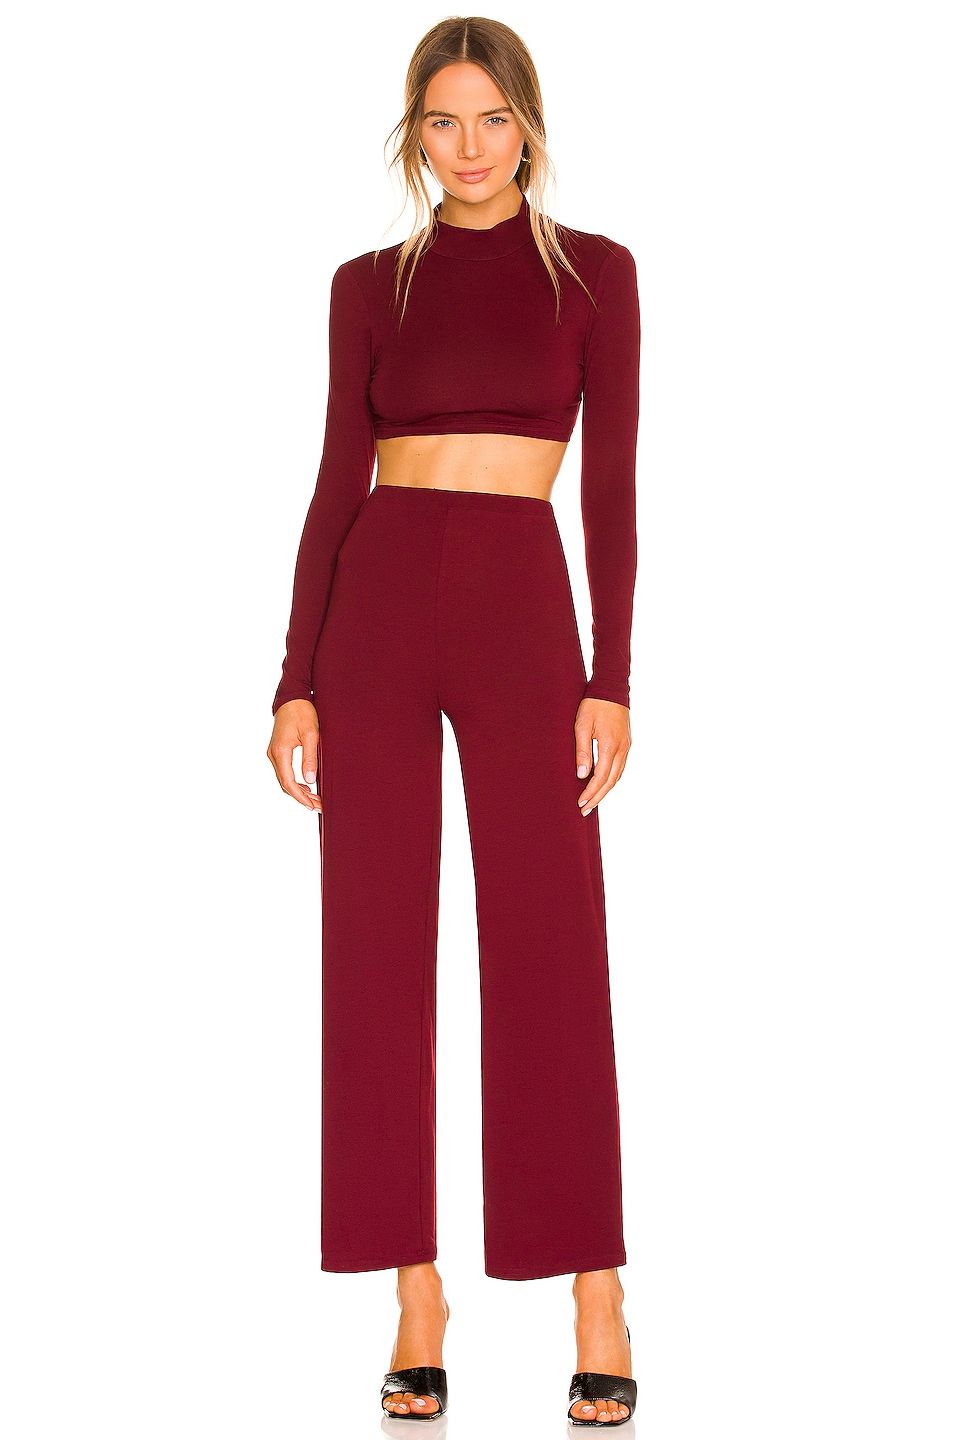 20 Cute Red Pants Outfit Ideas to Shop in 2023